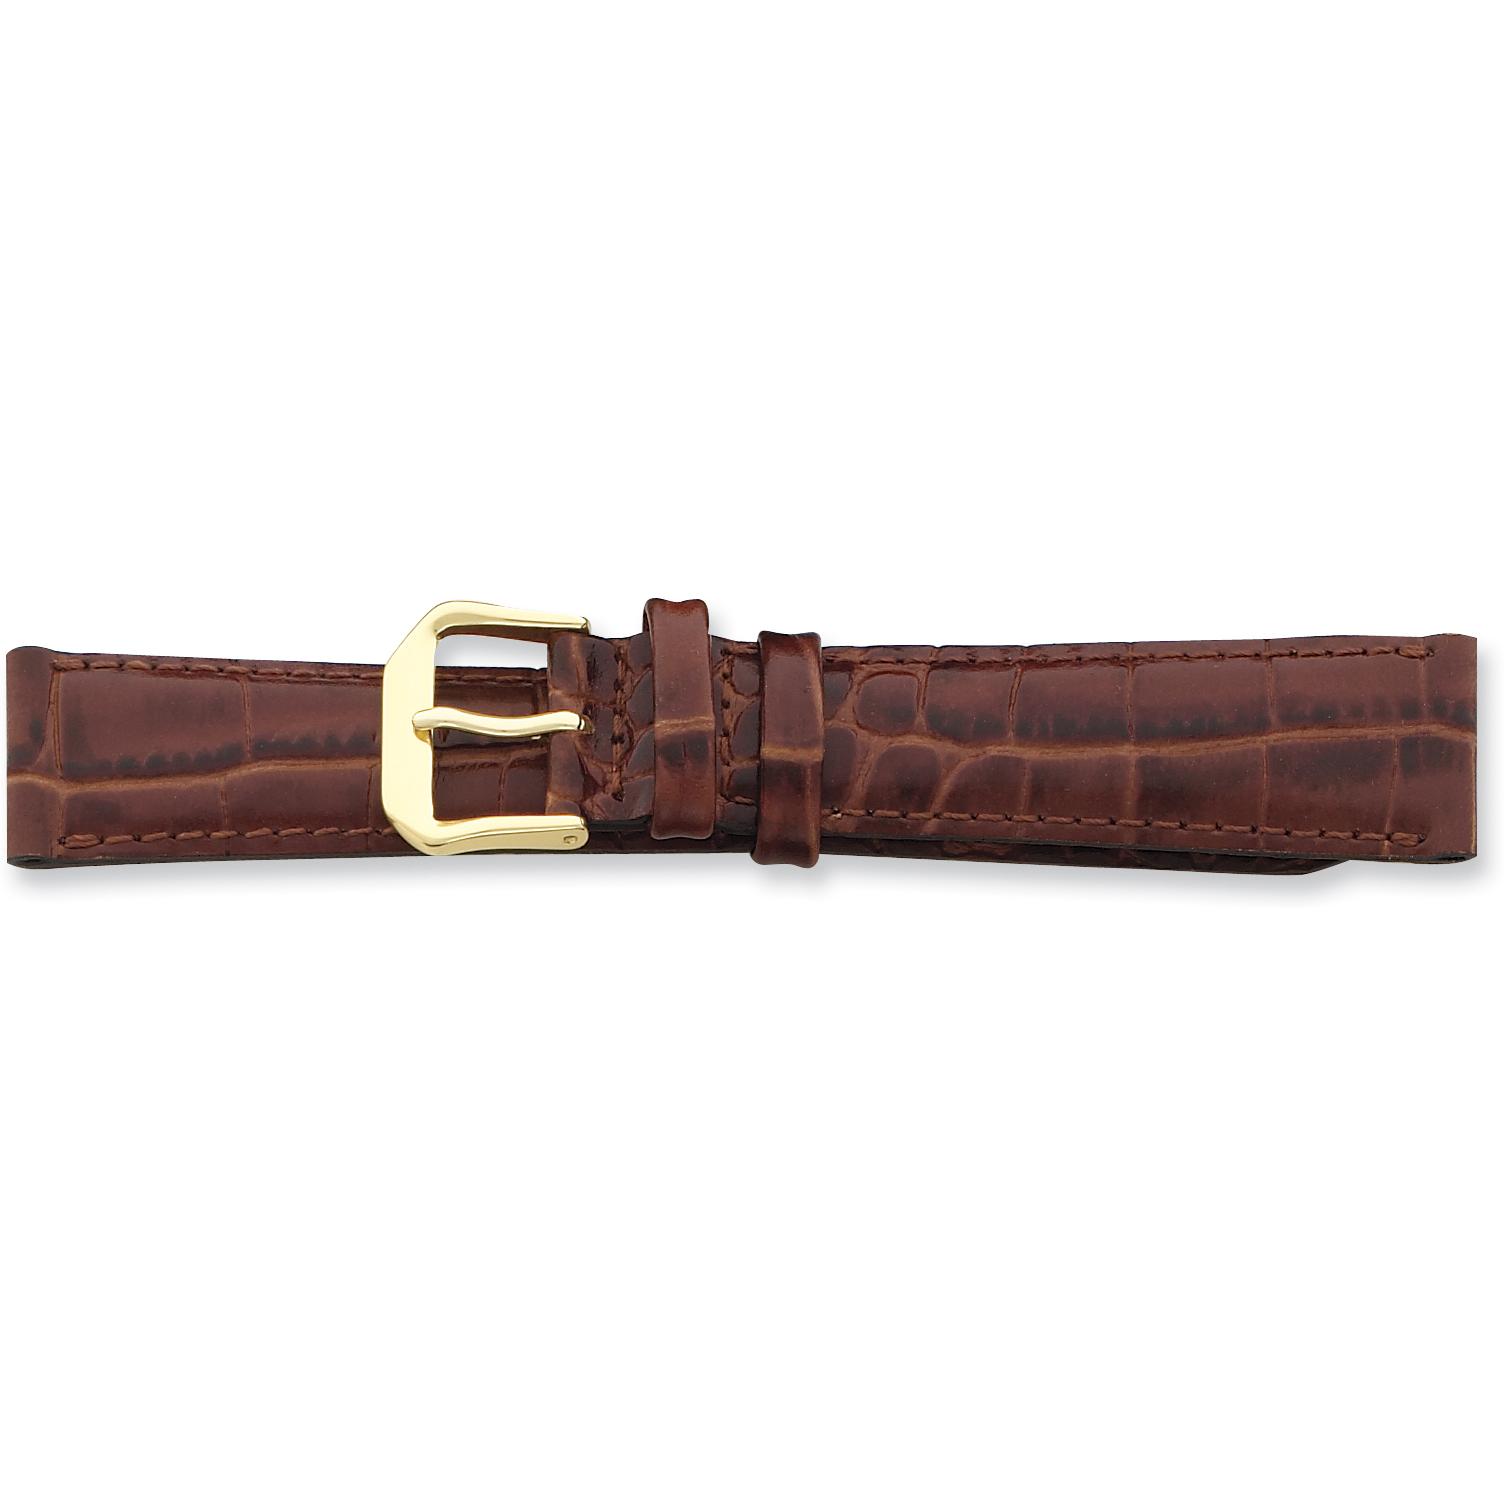 Findingking de Beer Brown Crocodile Grain Leather Watch Band 10mm Gold Color